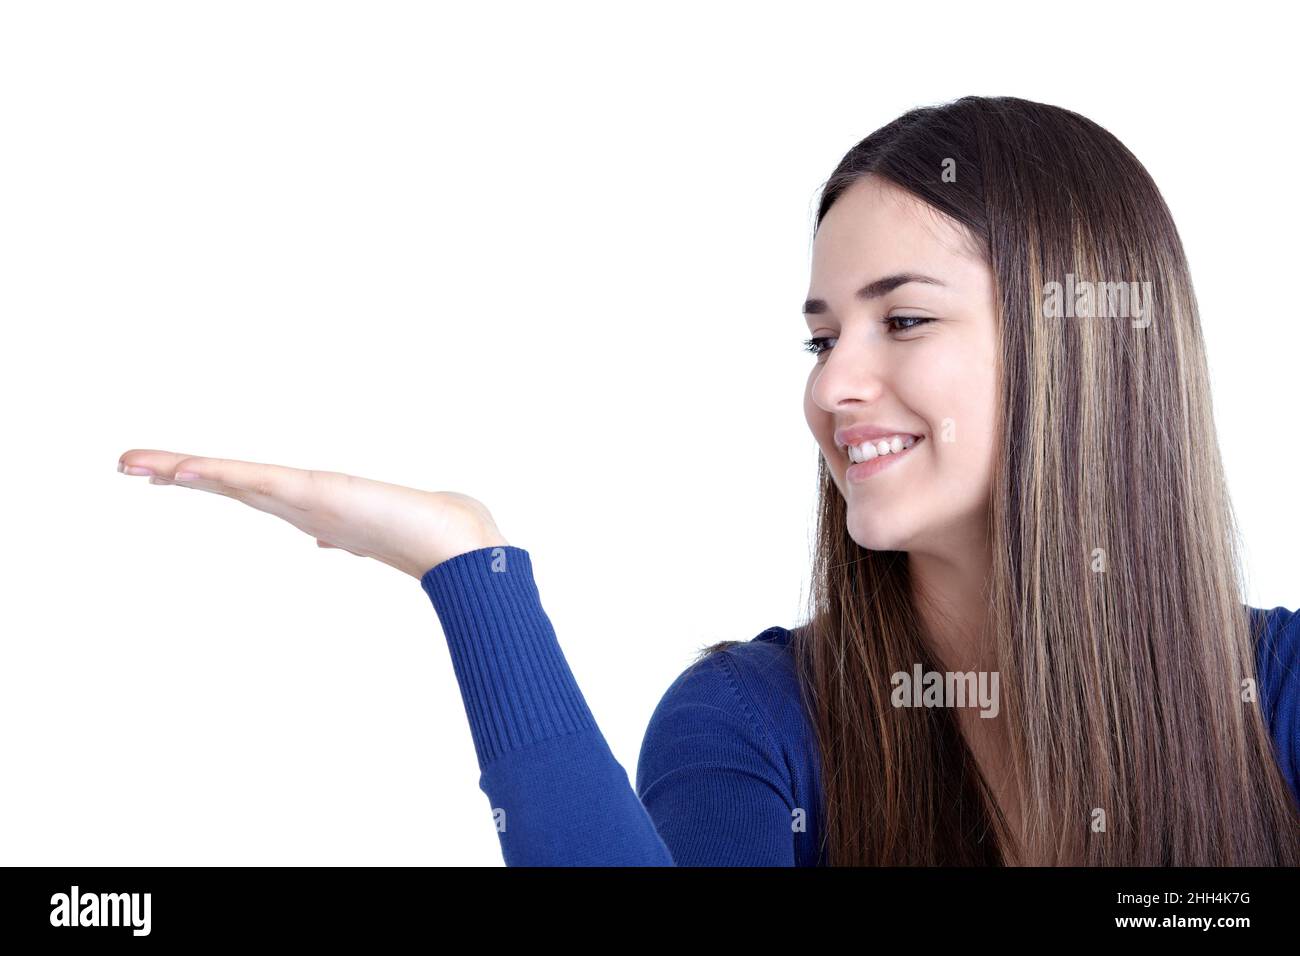 young girl pointing her finger showing direction Stock Photo